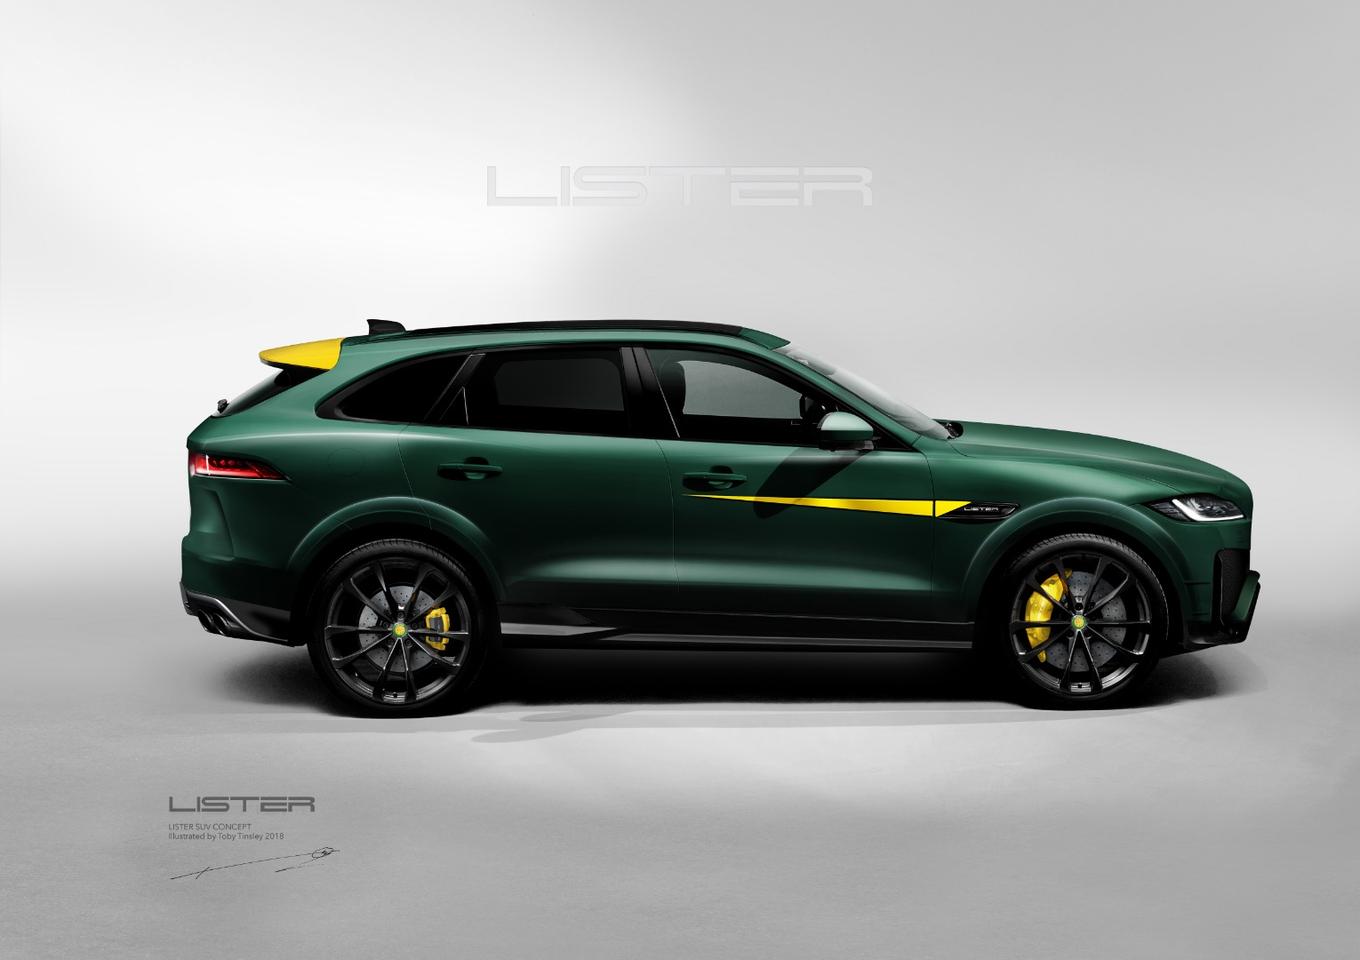 Lister LFP: a top speed of 200 mph, even with these aeros